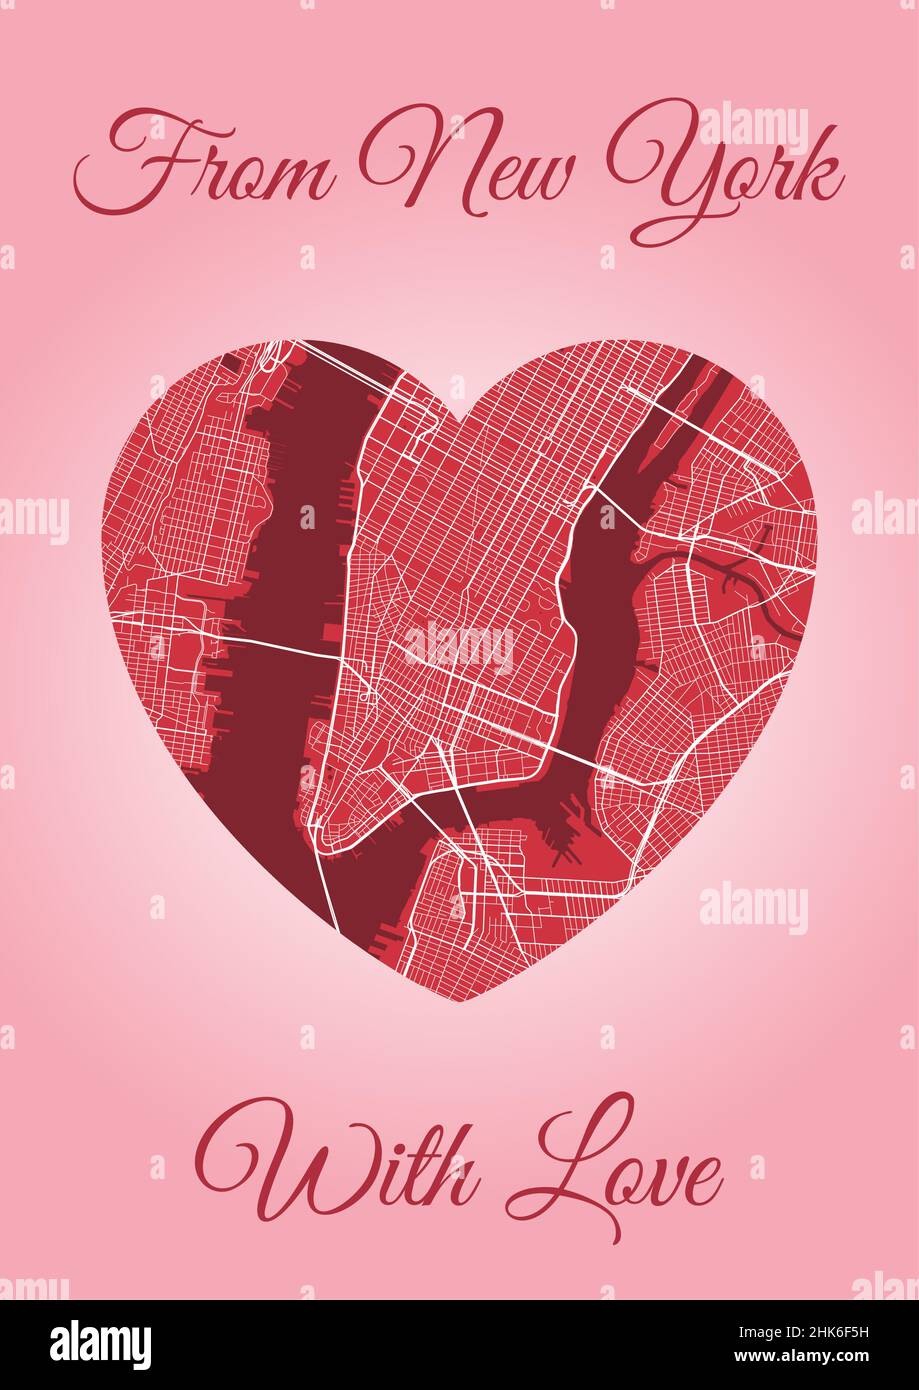 From New York City with love card, city map in heart shape. Vertical A4 Pink and red color vector illustration. Love city travel cityscape. Stock Vector